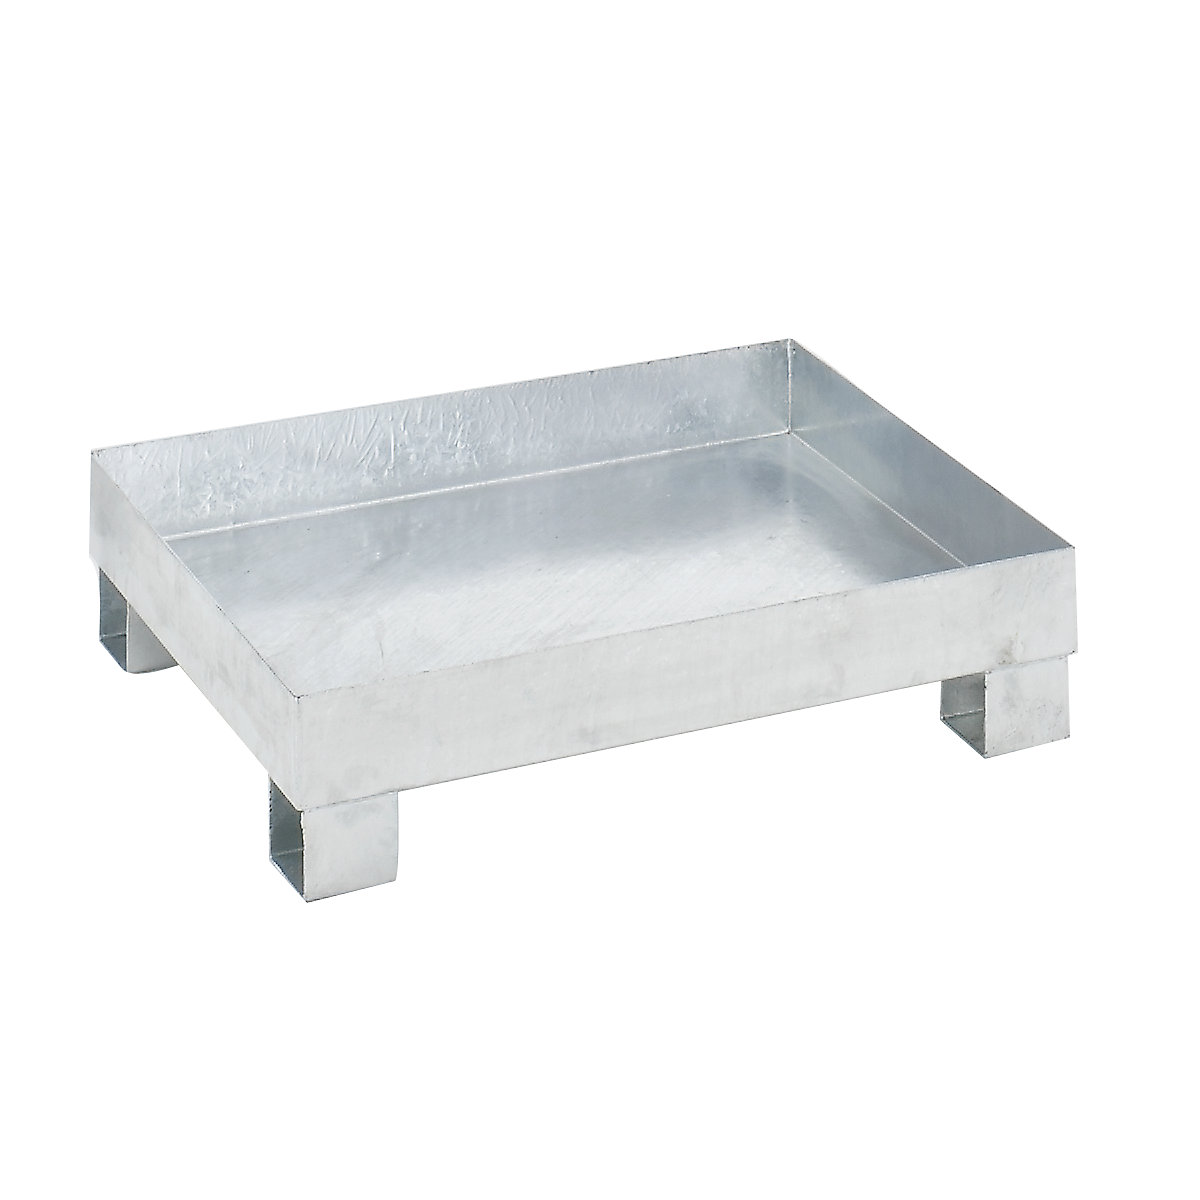 Sump tray for 60 l – eurokraft basic, LxWxH 800 x 900 x 220 mm, with certification, hot dip galvanised, without grate-5